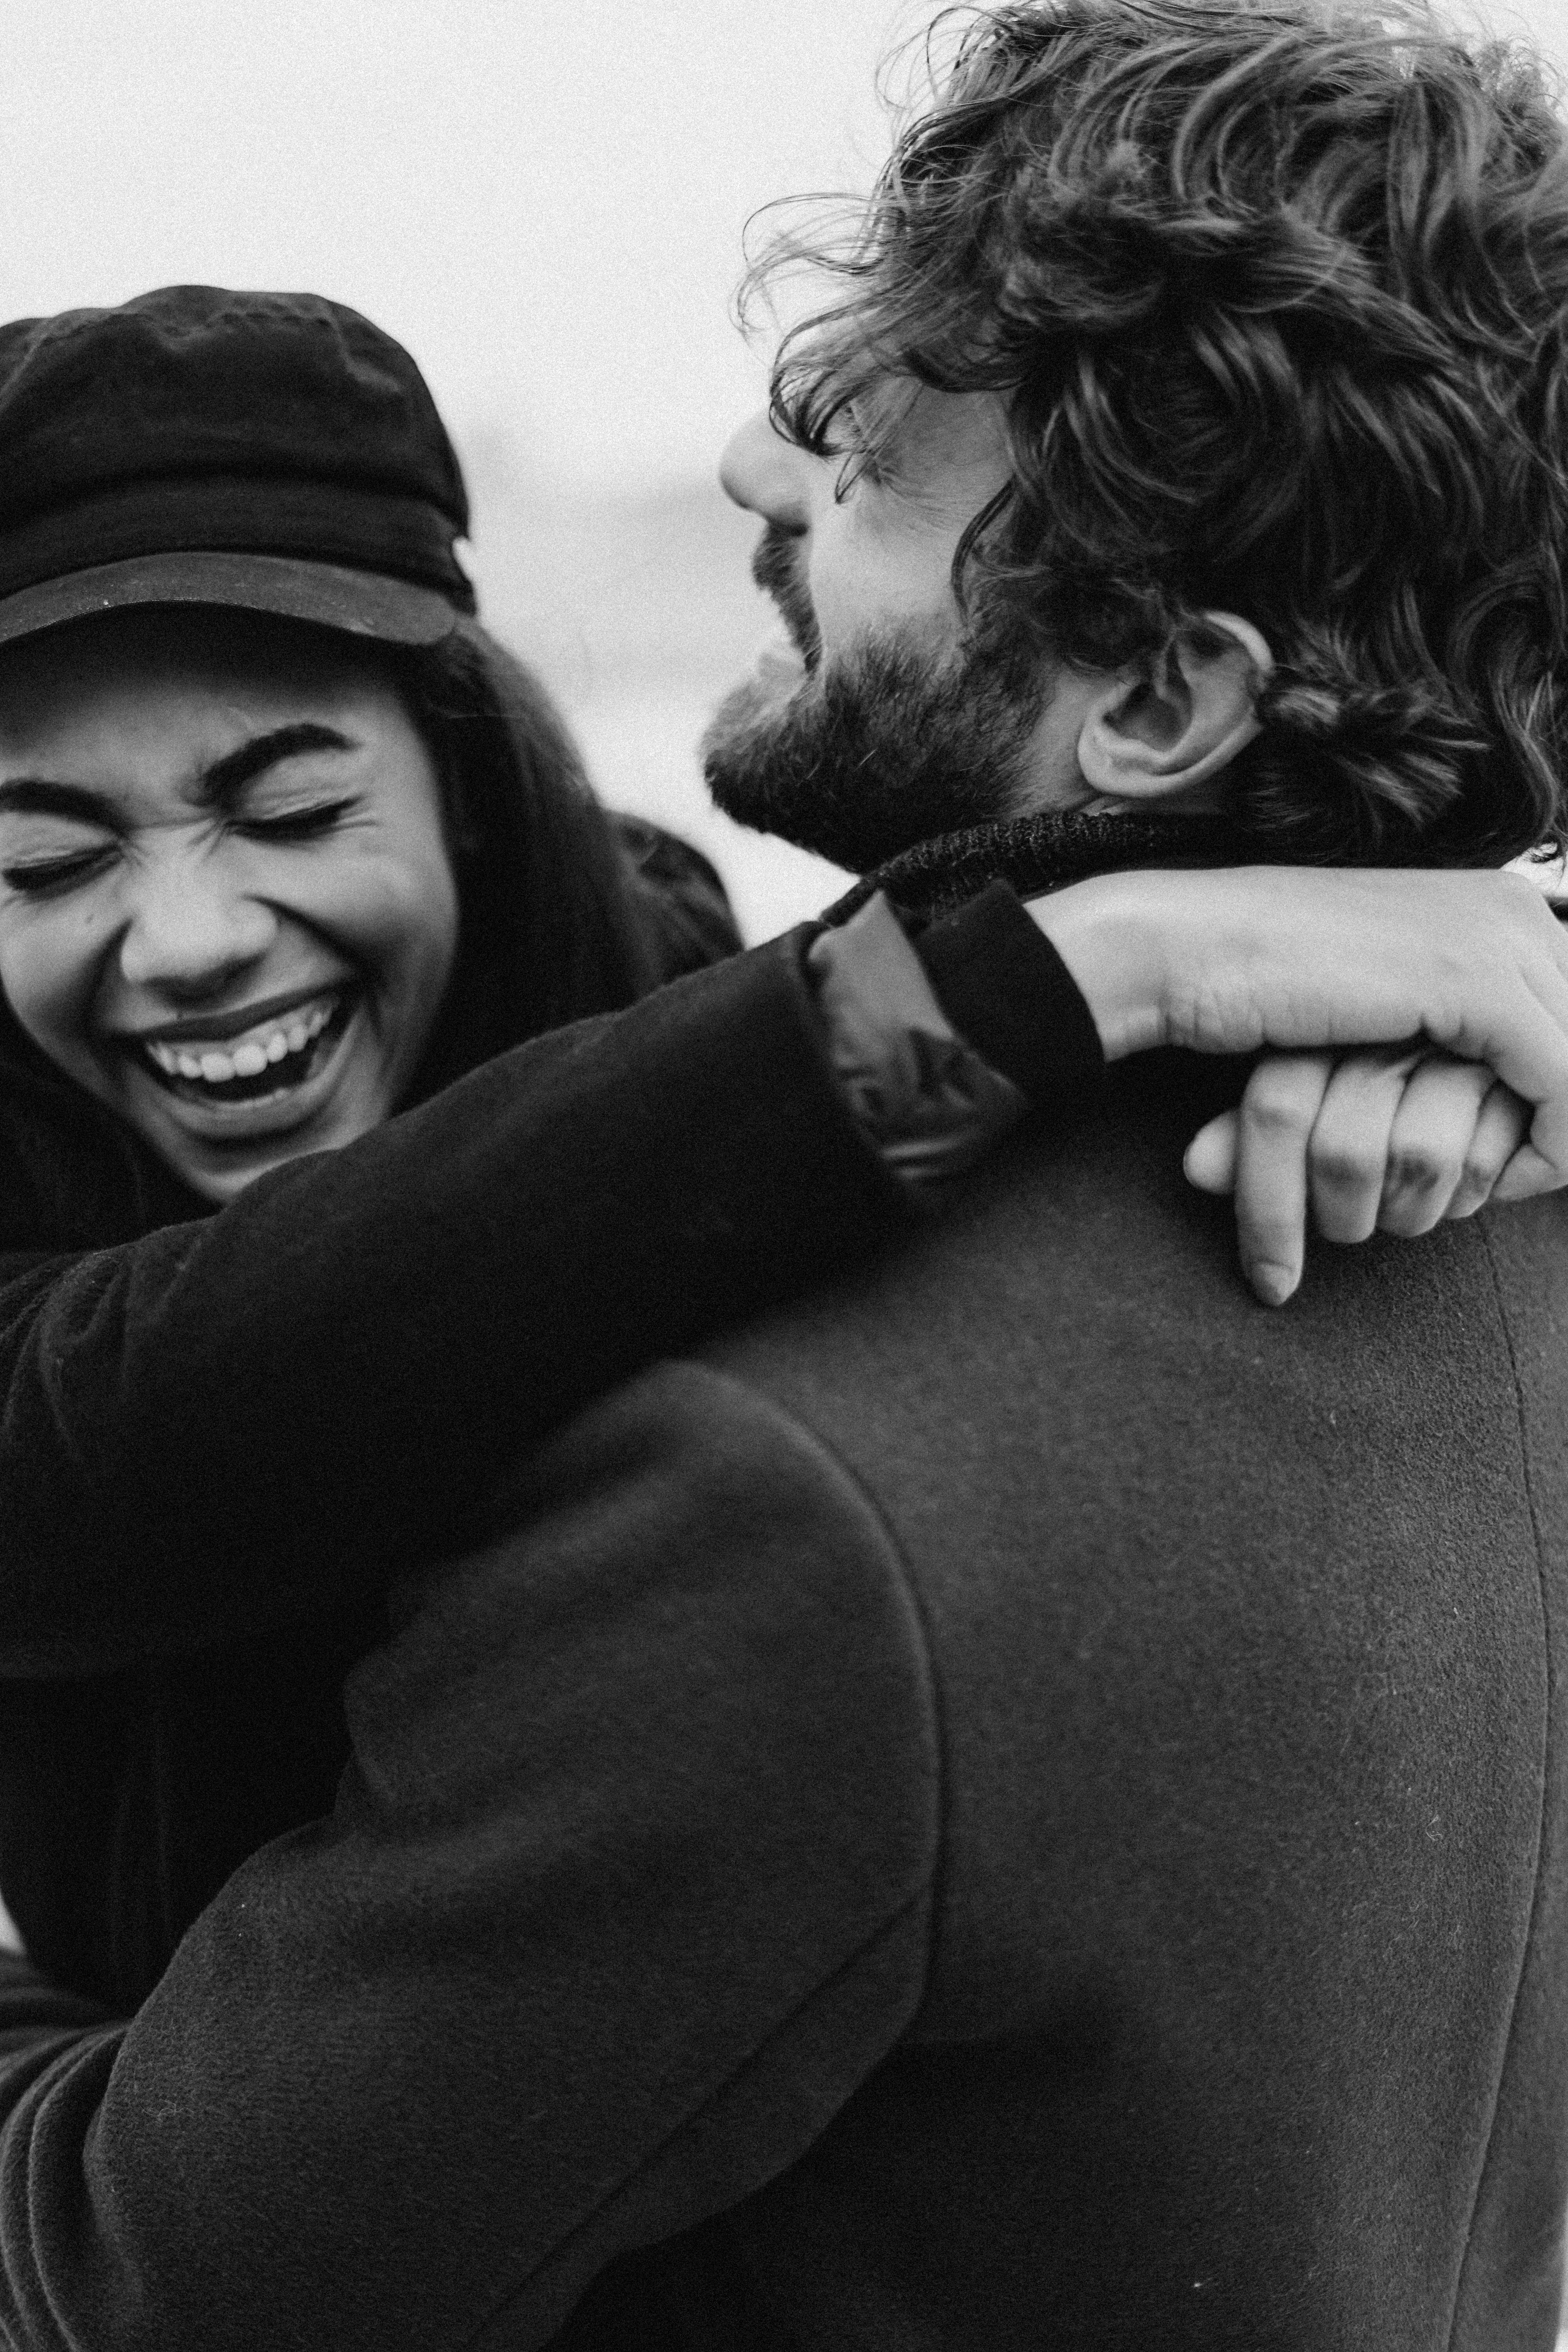 Couple laughing while hugging each other. | Source: Pexels